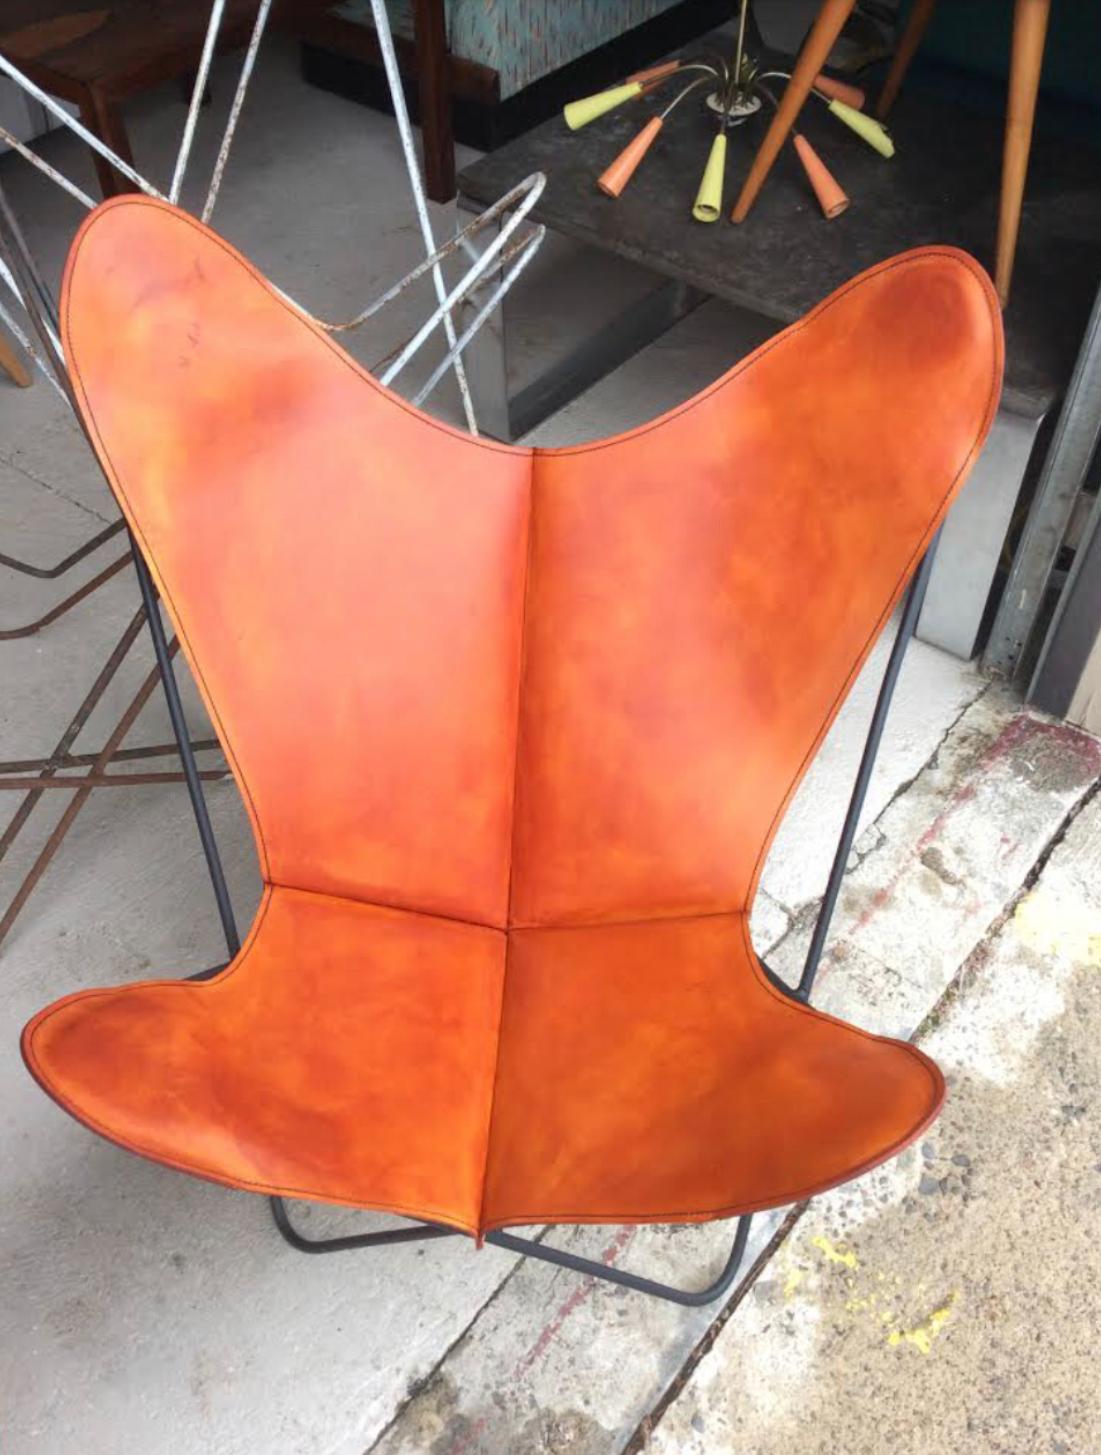 Knoll or Hardoy BFK wrought iron butterfly chairs with leather slings. Brand new thick leather four piece slings, with heavy duty stitching, brass rivets and hand rubbed aged finish. They were copied from an original cover, hand made and fit like a